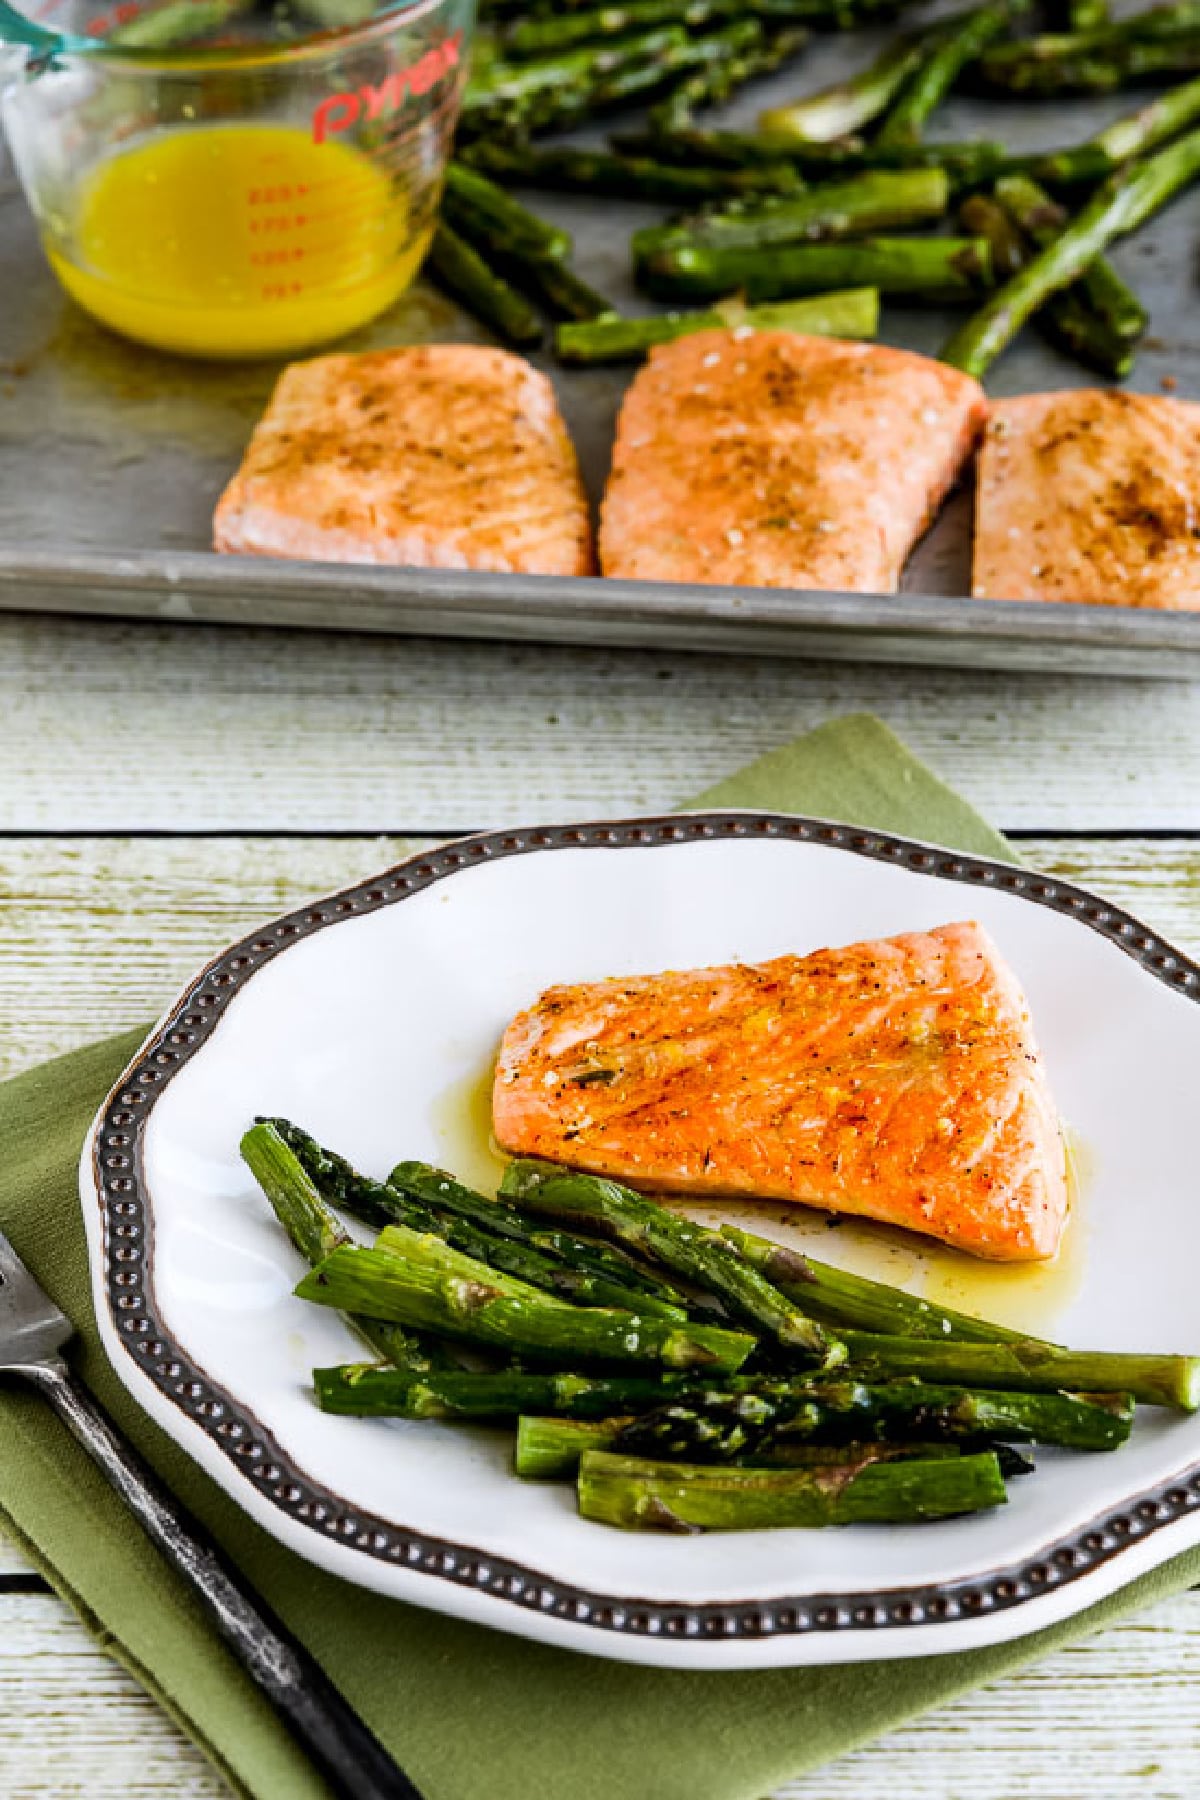 Salmon and Asparagus Sheet Pan Meal with one serving on plate and sheet pan in back